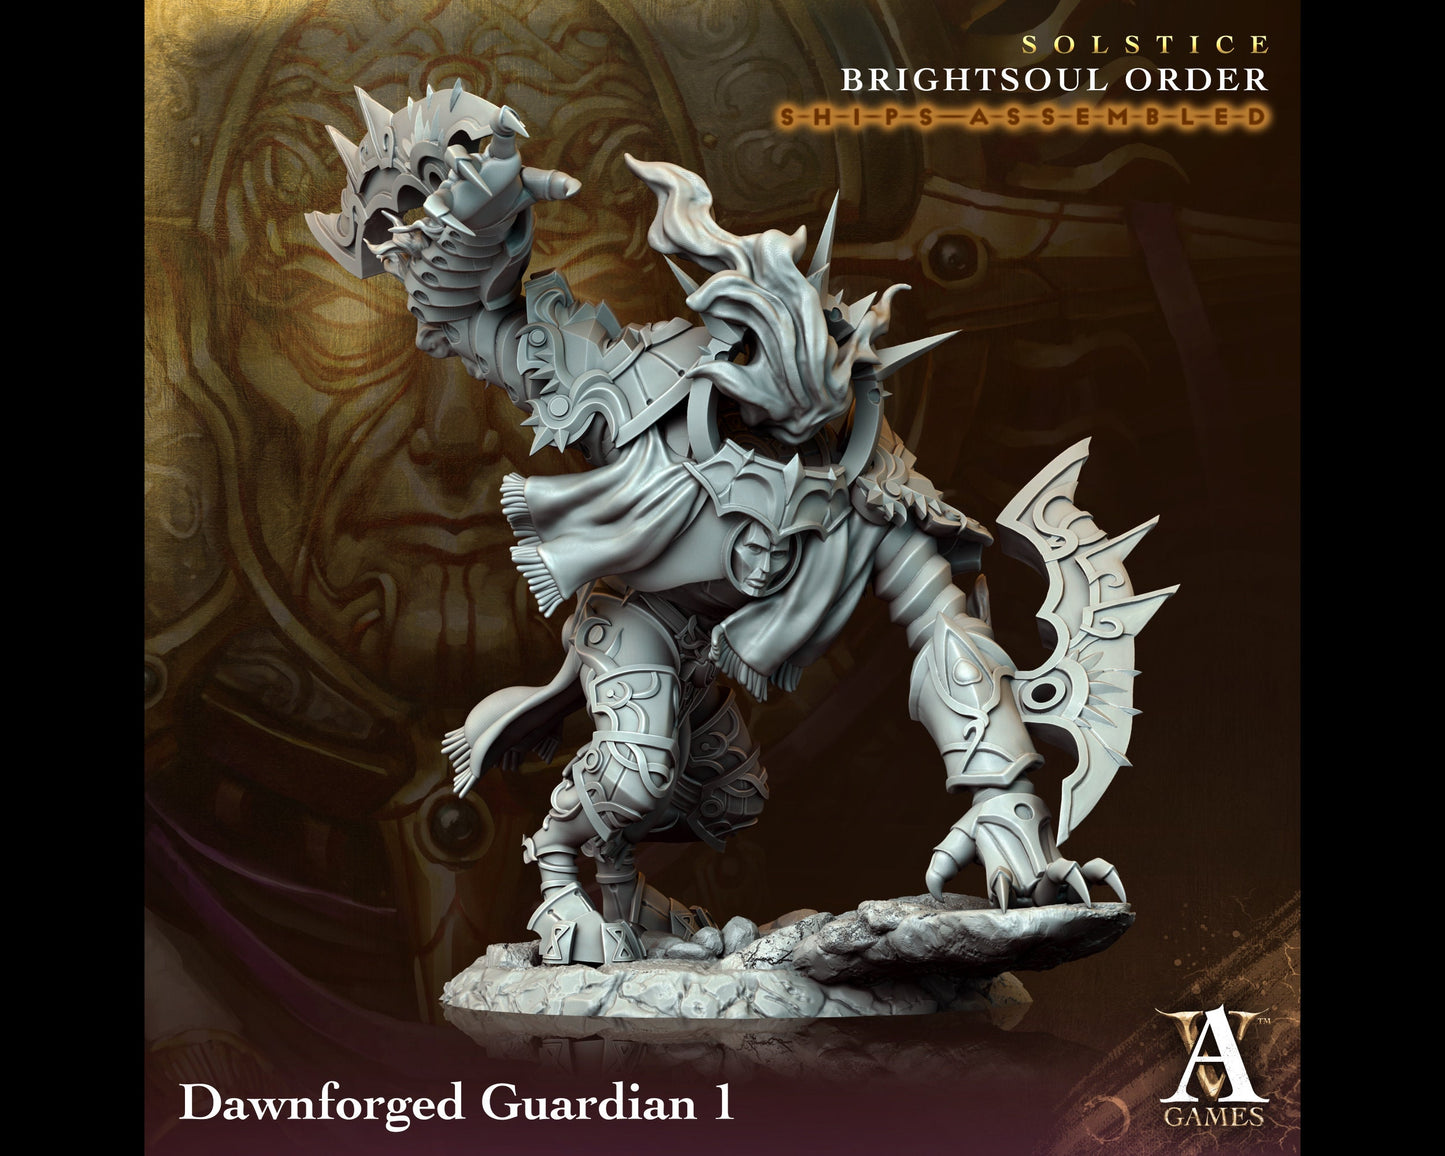 Dawnforged Guardian 1 - Brightsoul Order - Highly Detailed Resin 8k 3D Printed Miniature